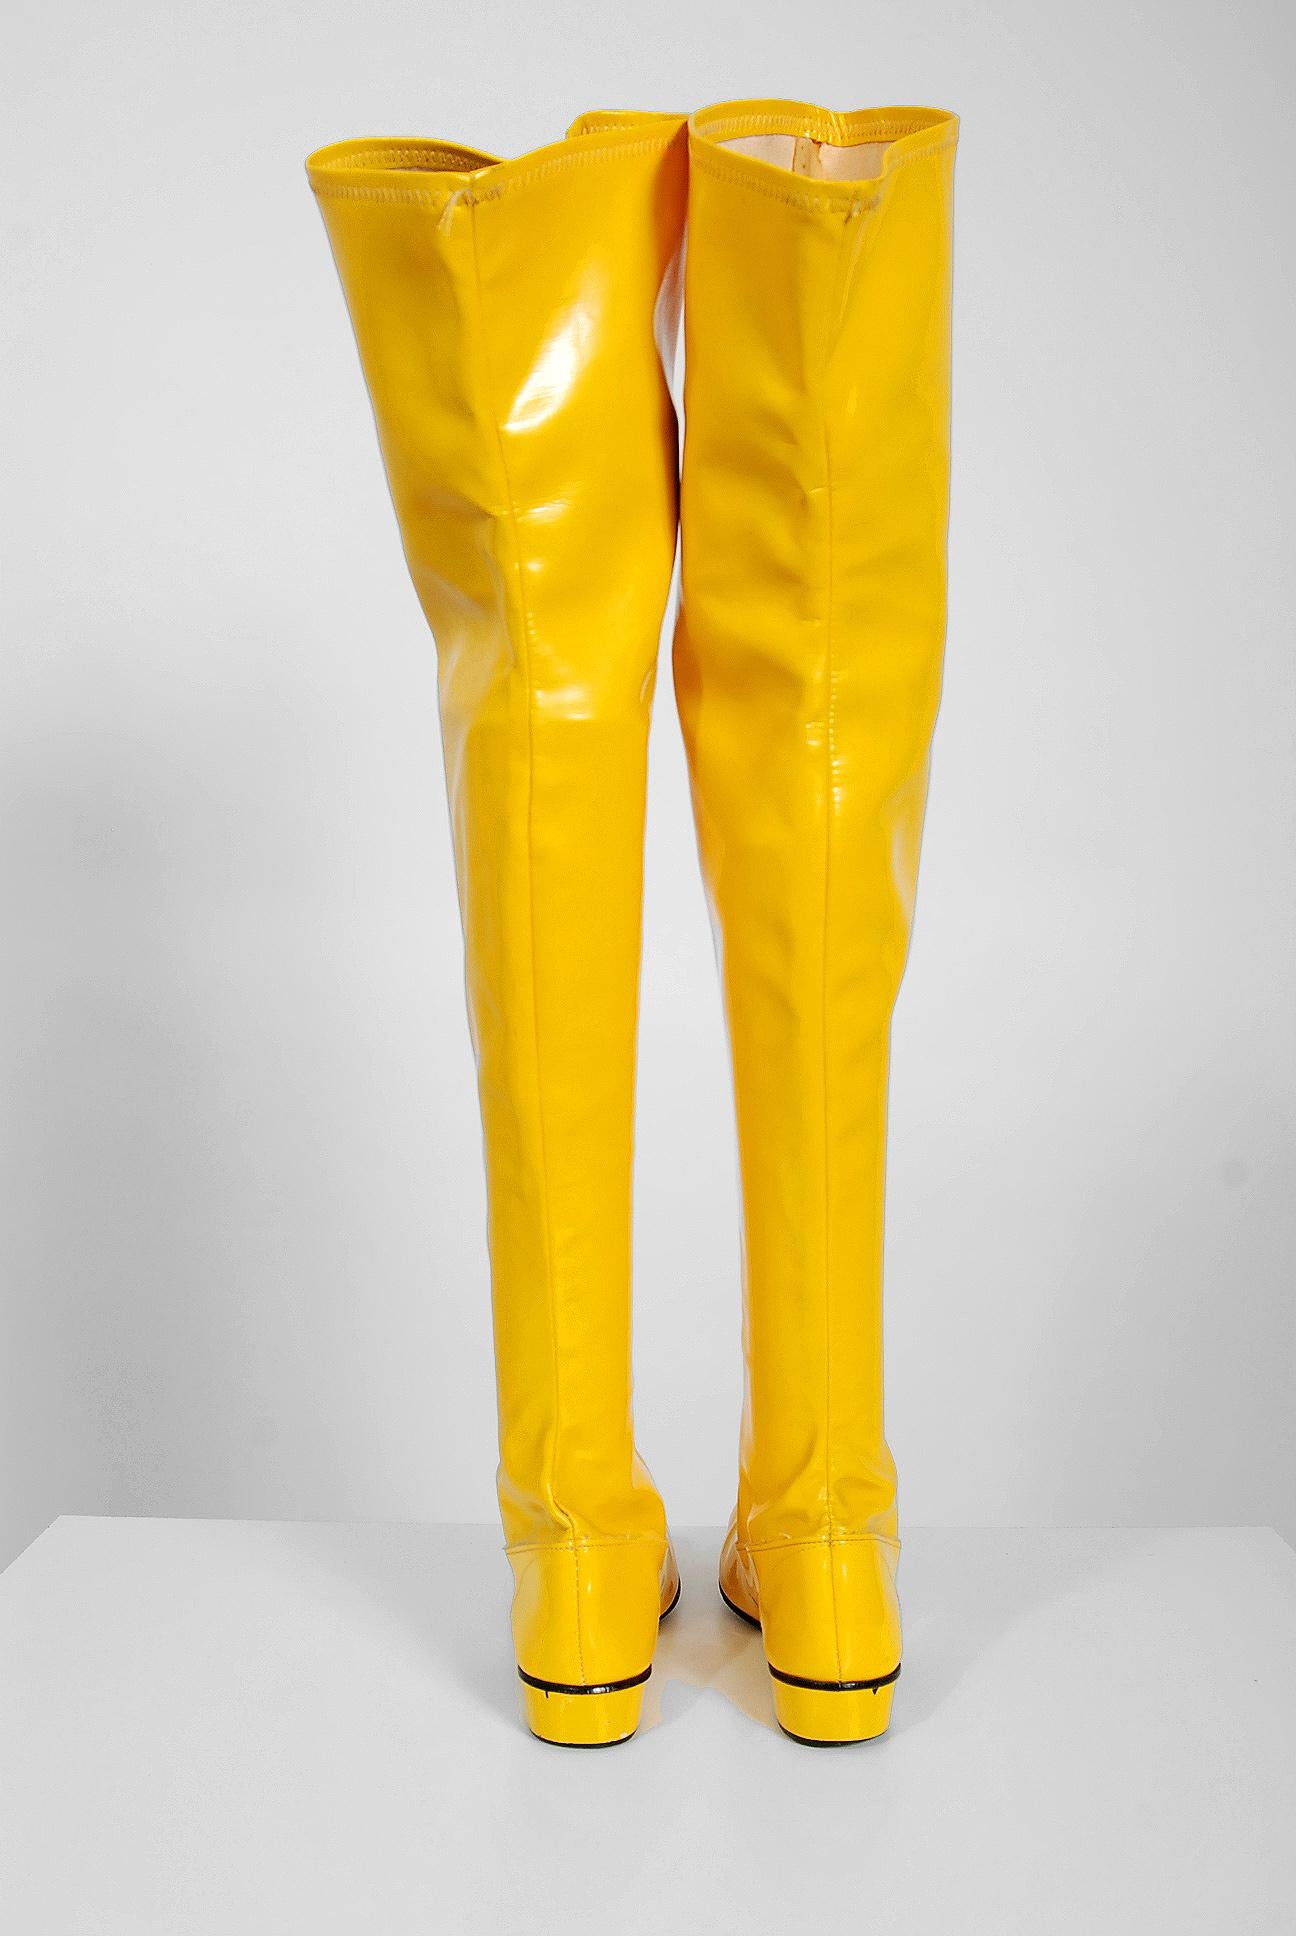 A sensational pair of sunshine yellow vinyl boots dating back to the late 1960's. I love the unique color and chic thigh-high length. Easy pull-on style and classic low space-age heel. Mod boots in a rare color like these do not come around